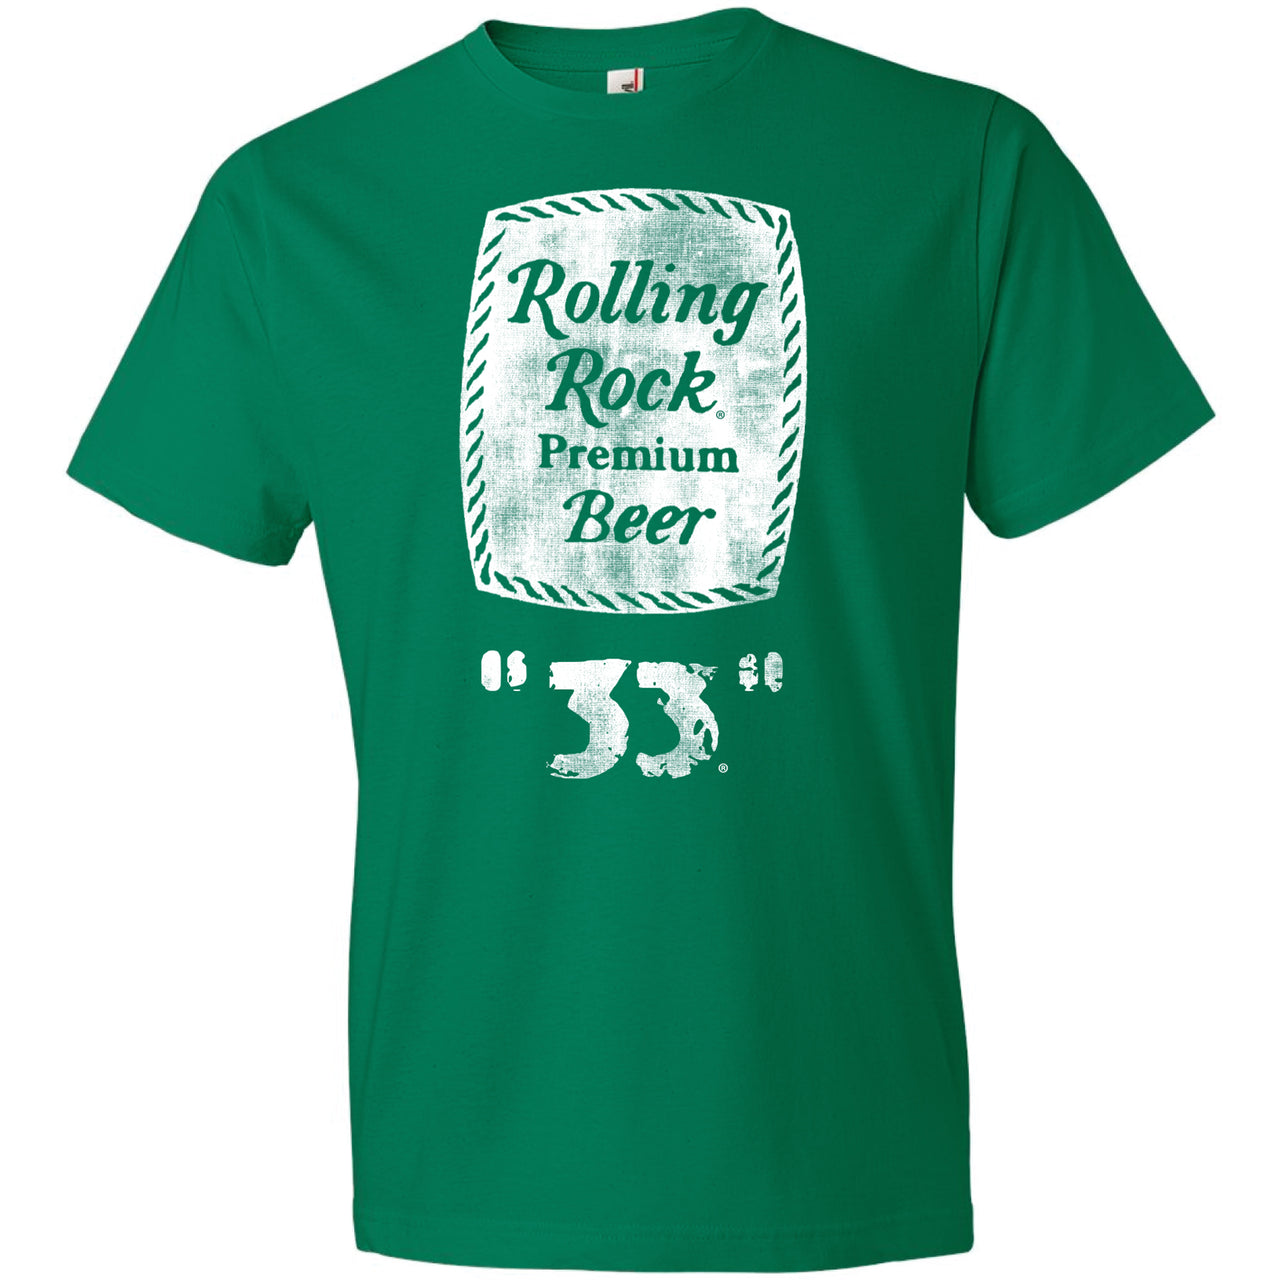 Rolling Rock - 33 Rope Label T-shirt